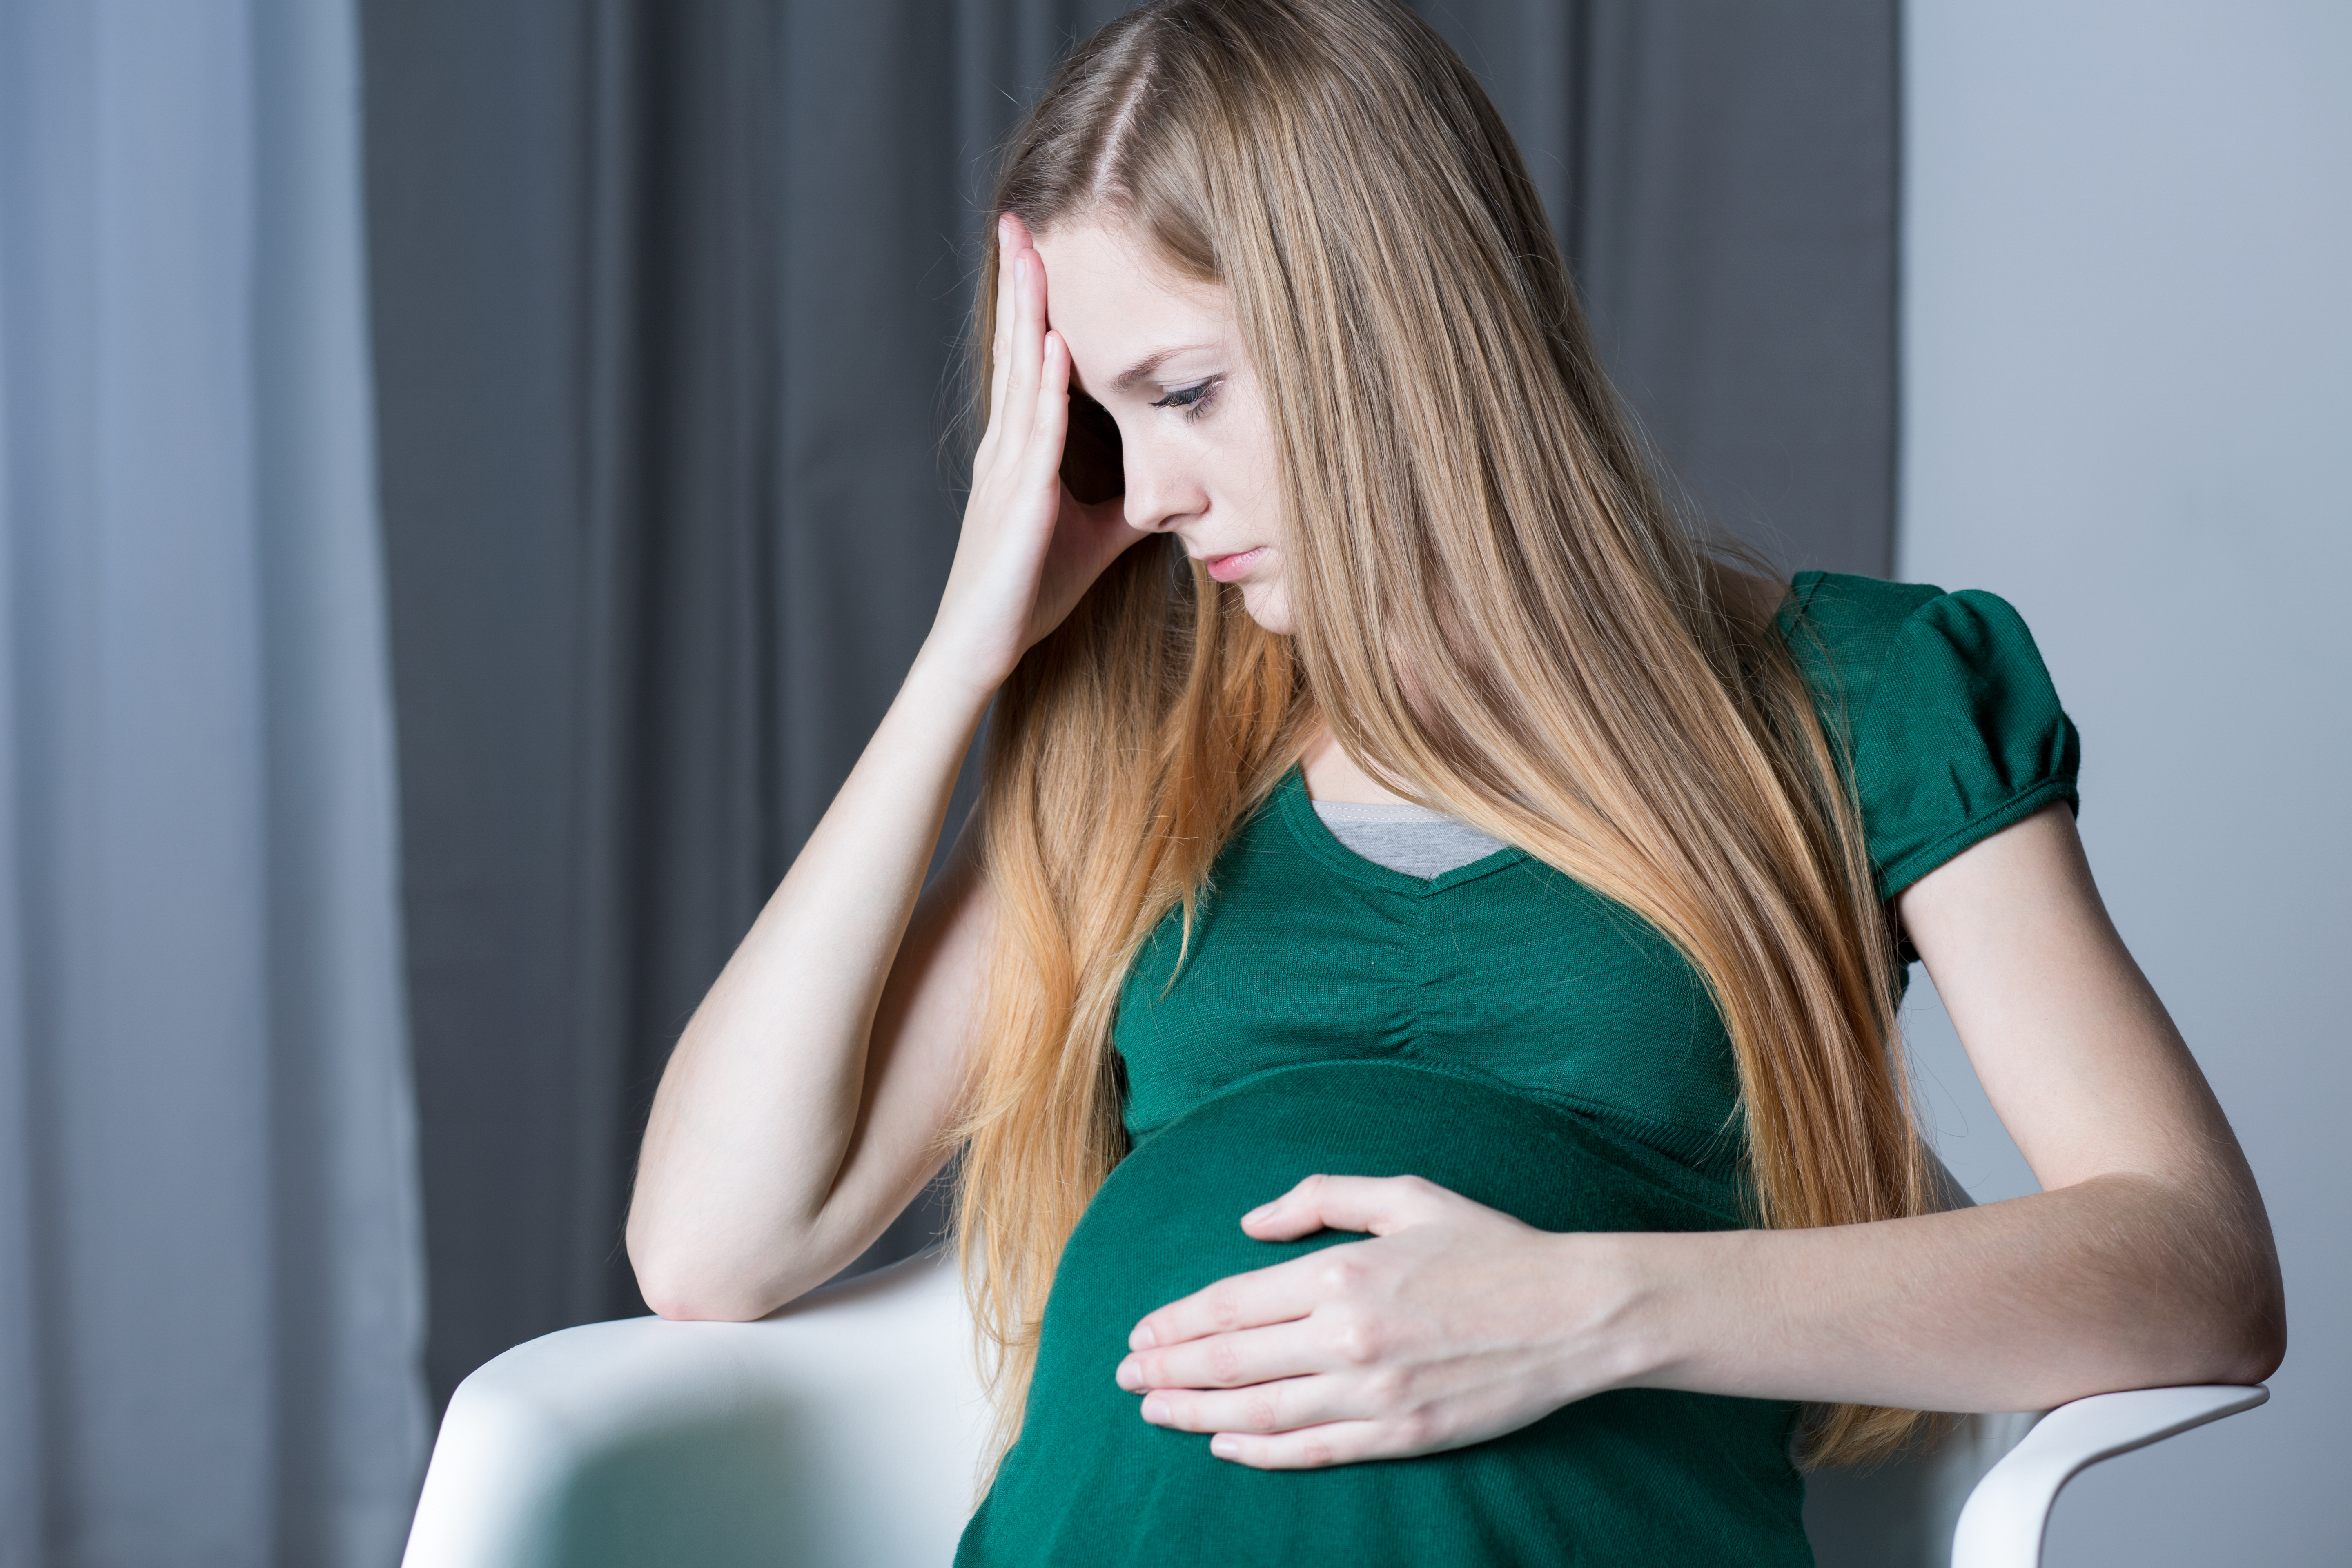 An upset pregnant woman sitting an holding her head and belly | Source: Shutterstock